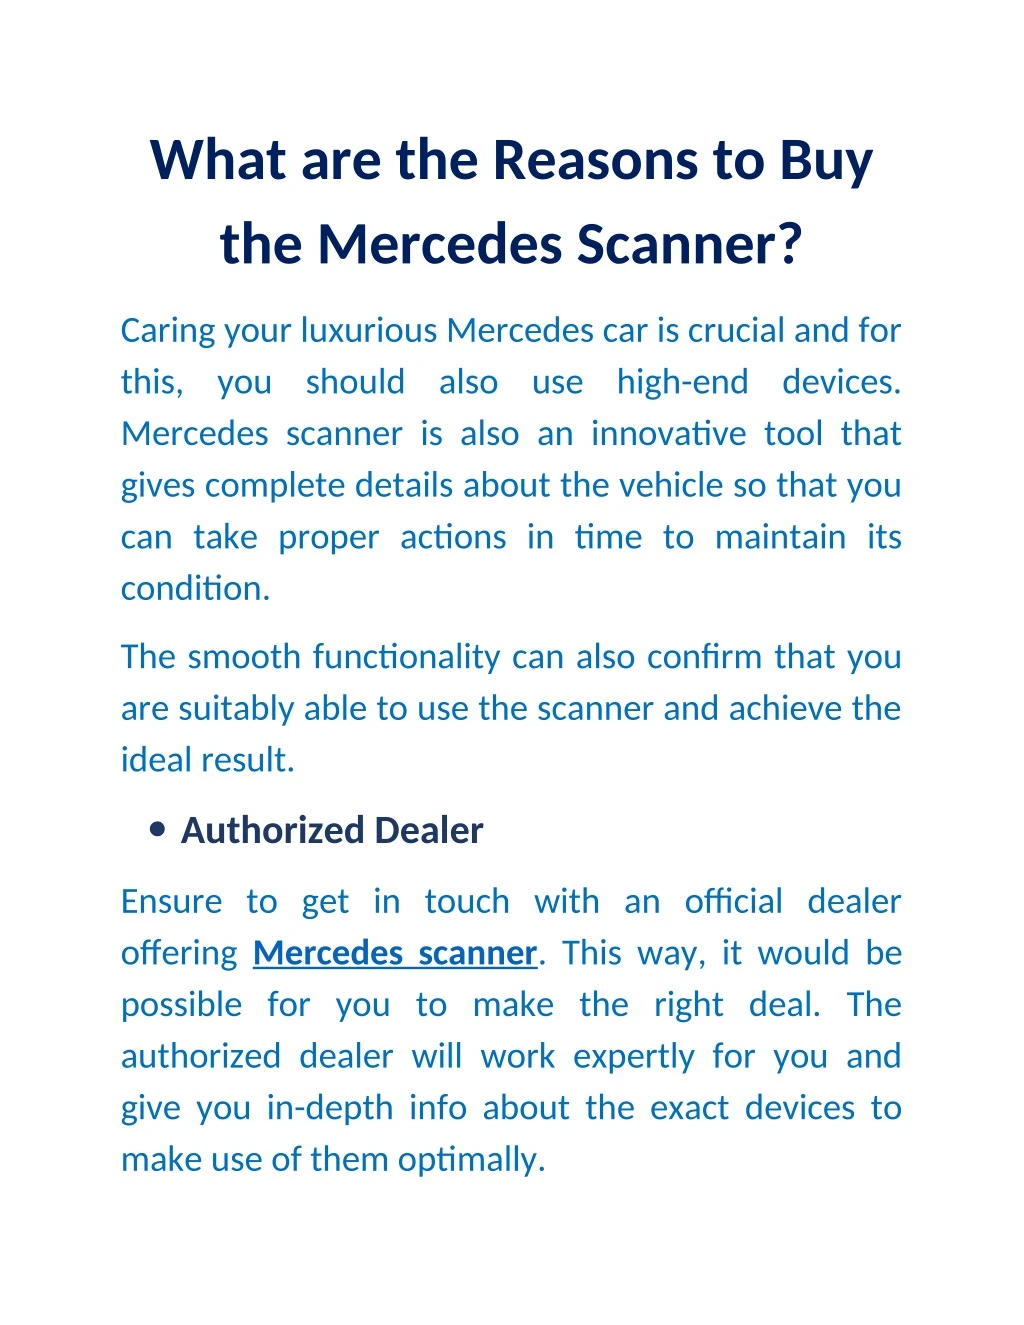 what are the reasons to buy the mercedes scanner